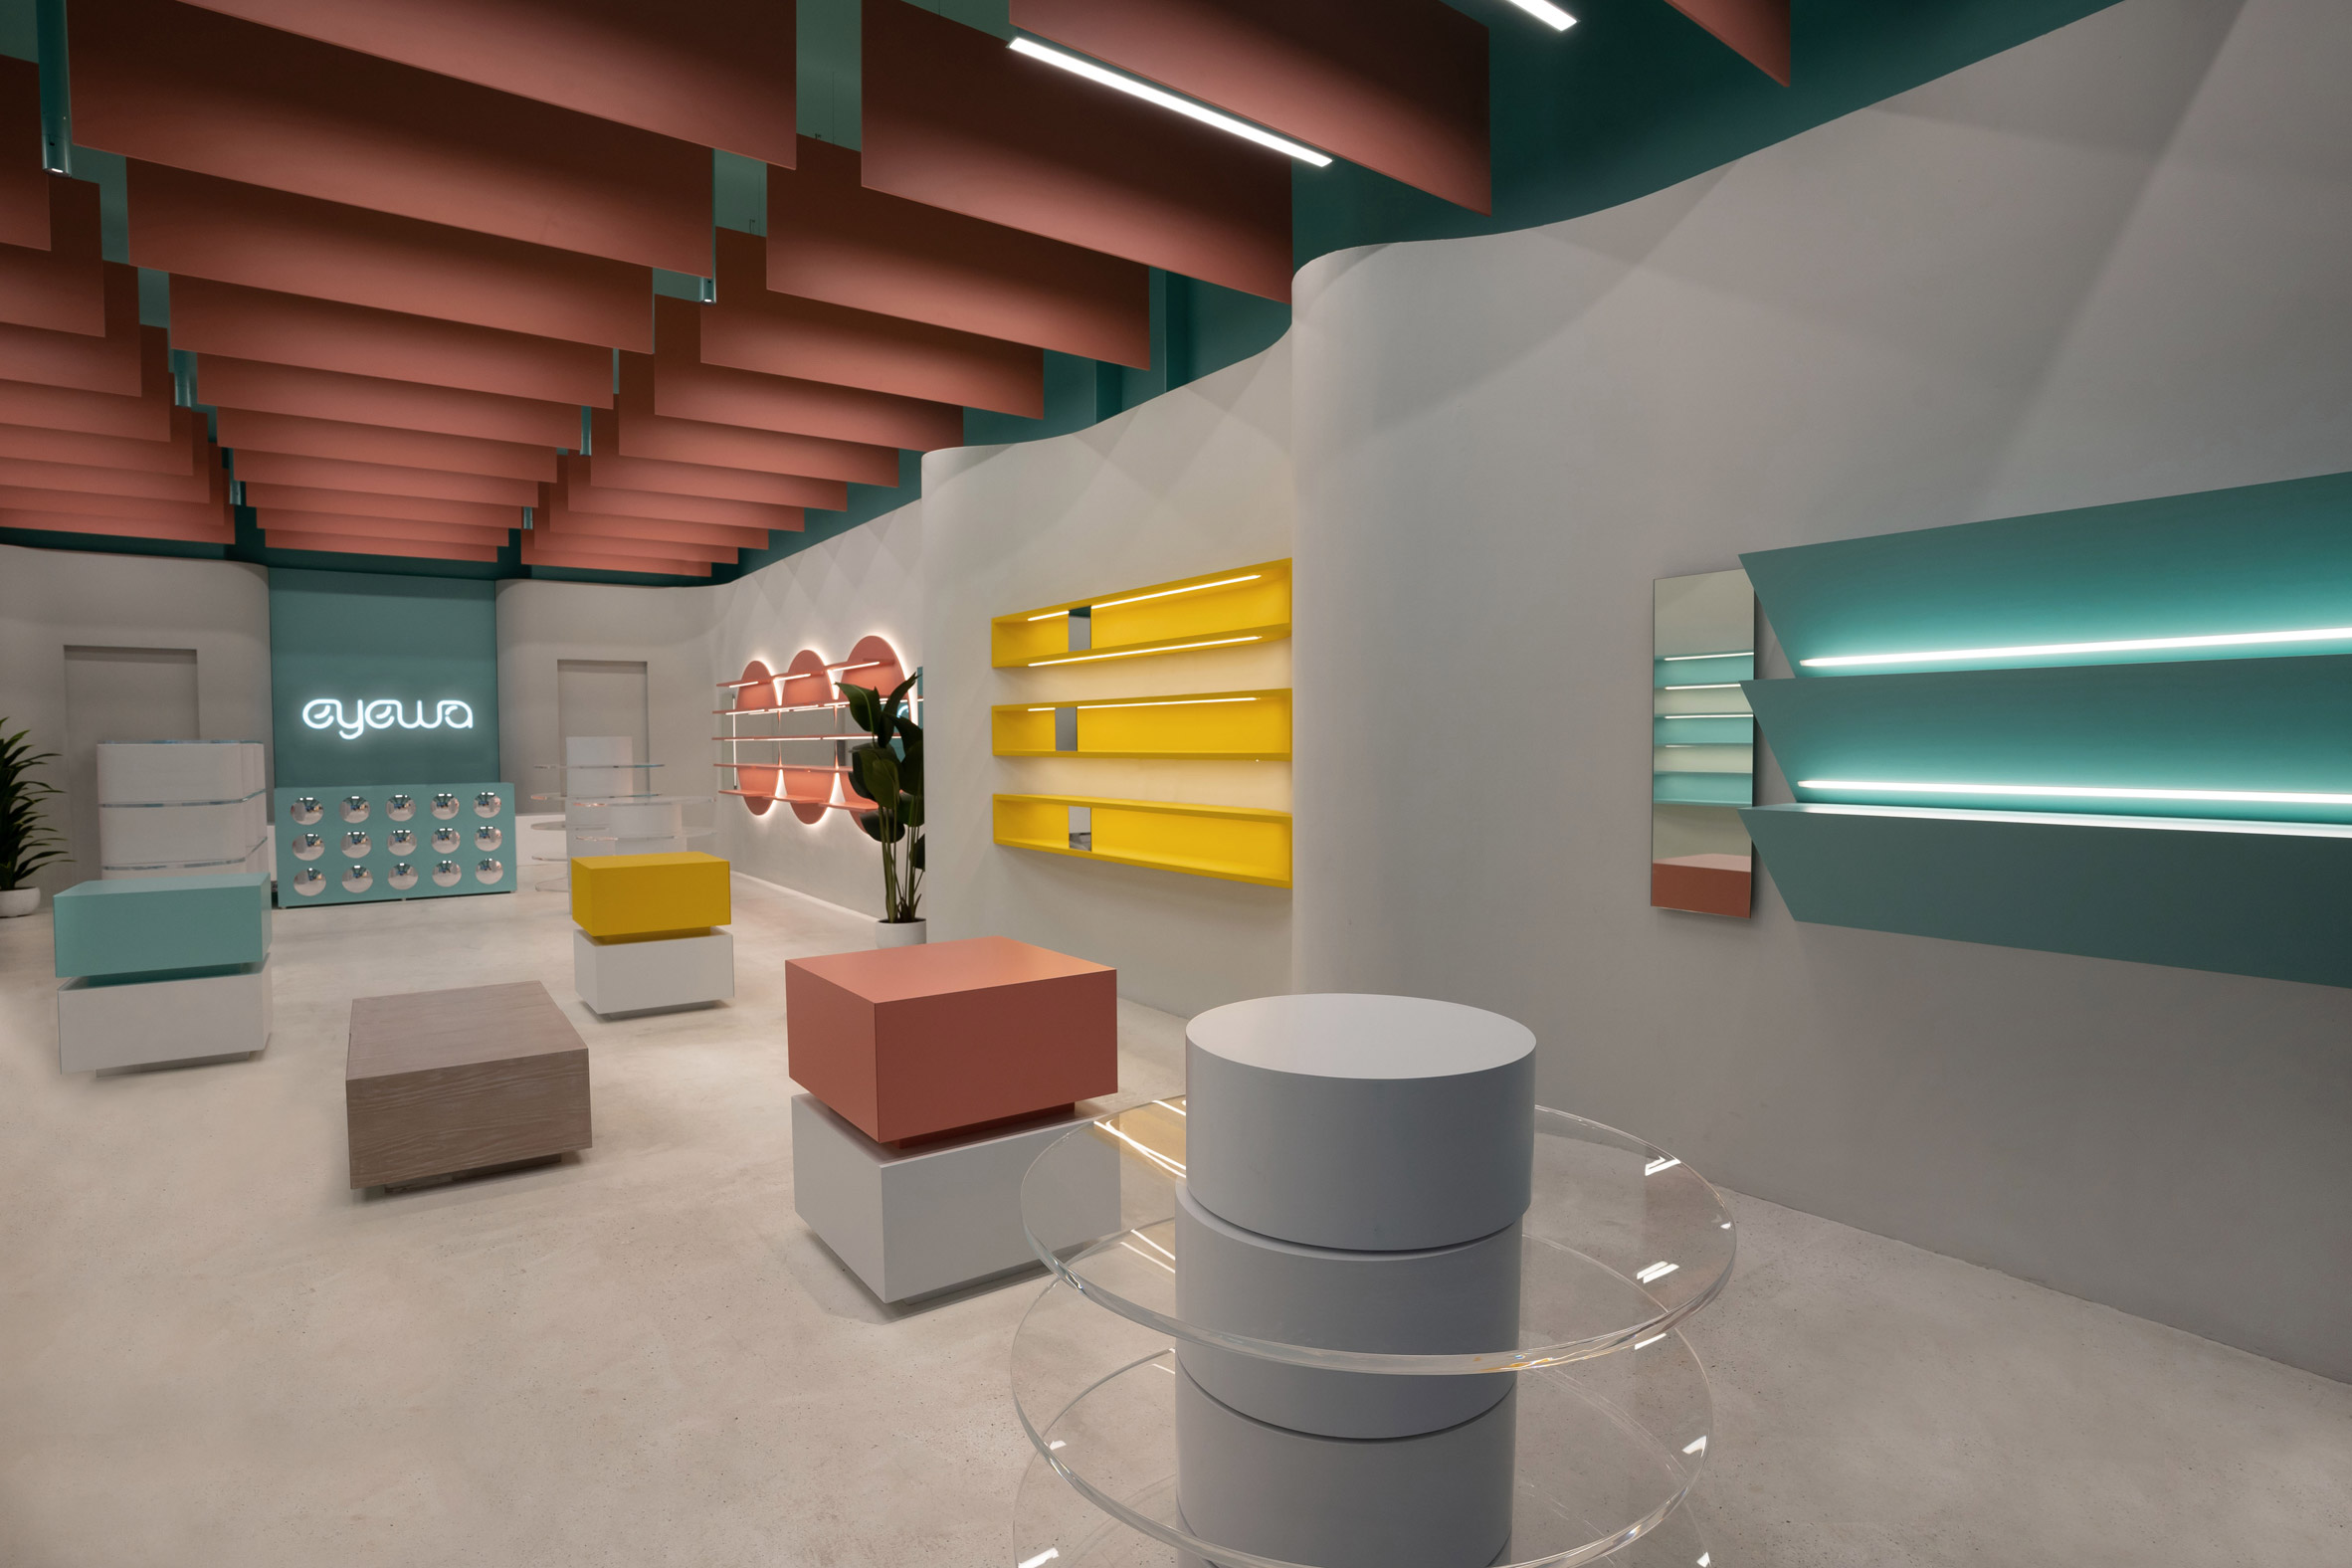 Overview of Eyewa store interior by Pierre Brocas and Nada Oudghiri